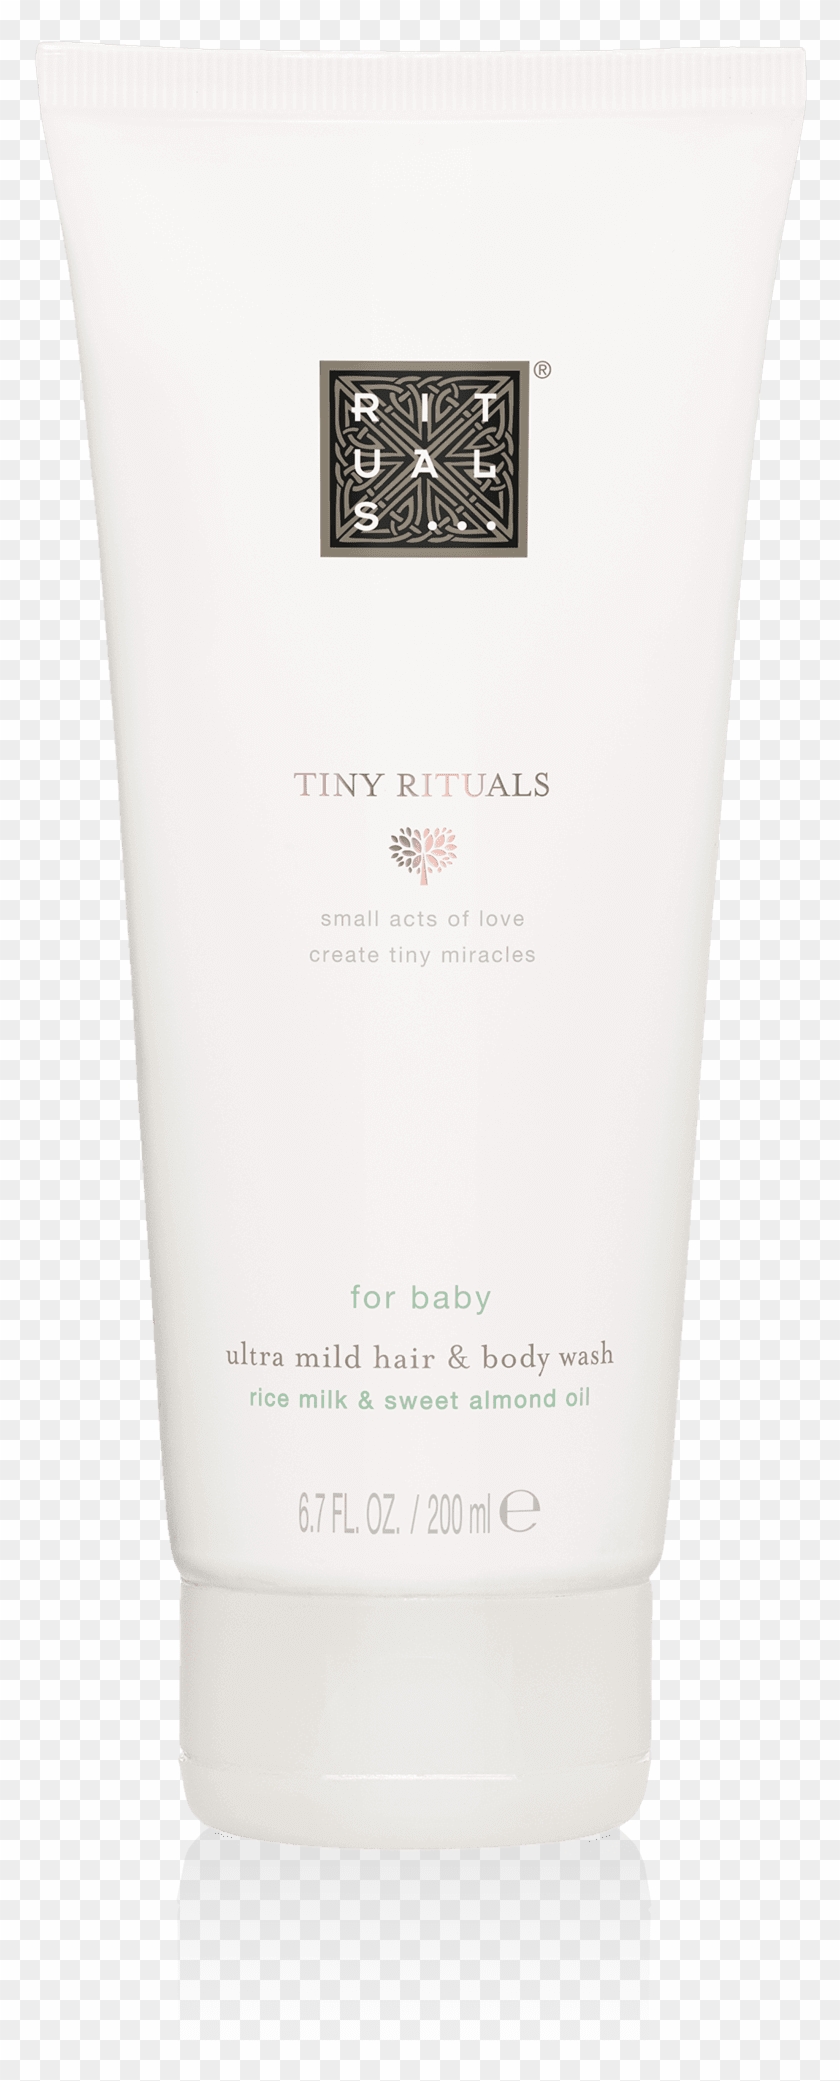 Tiny Rituals Baby Hair & Body Wash - Bottle Clipart #3522376